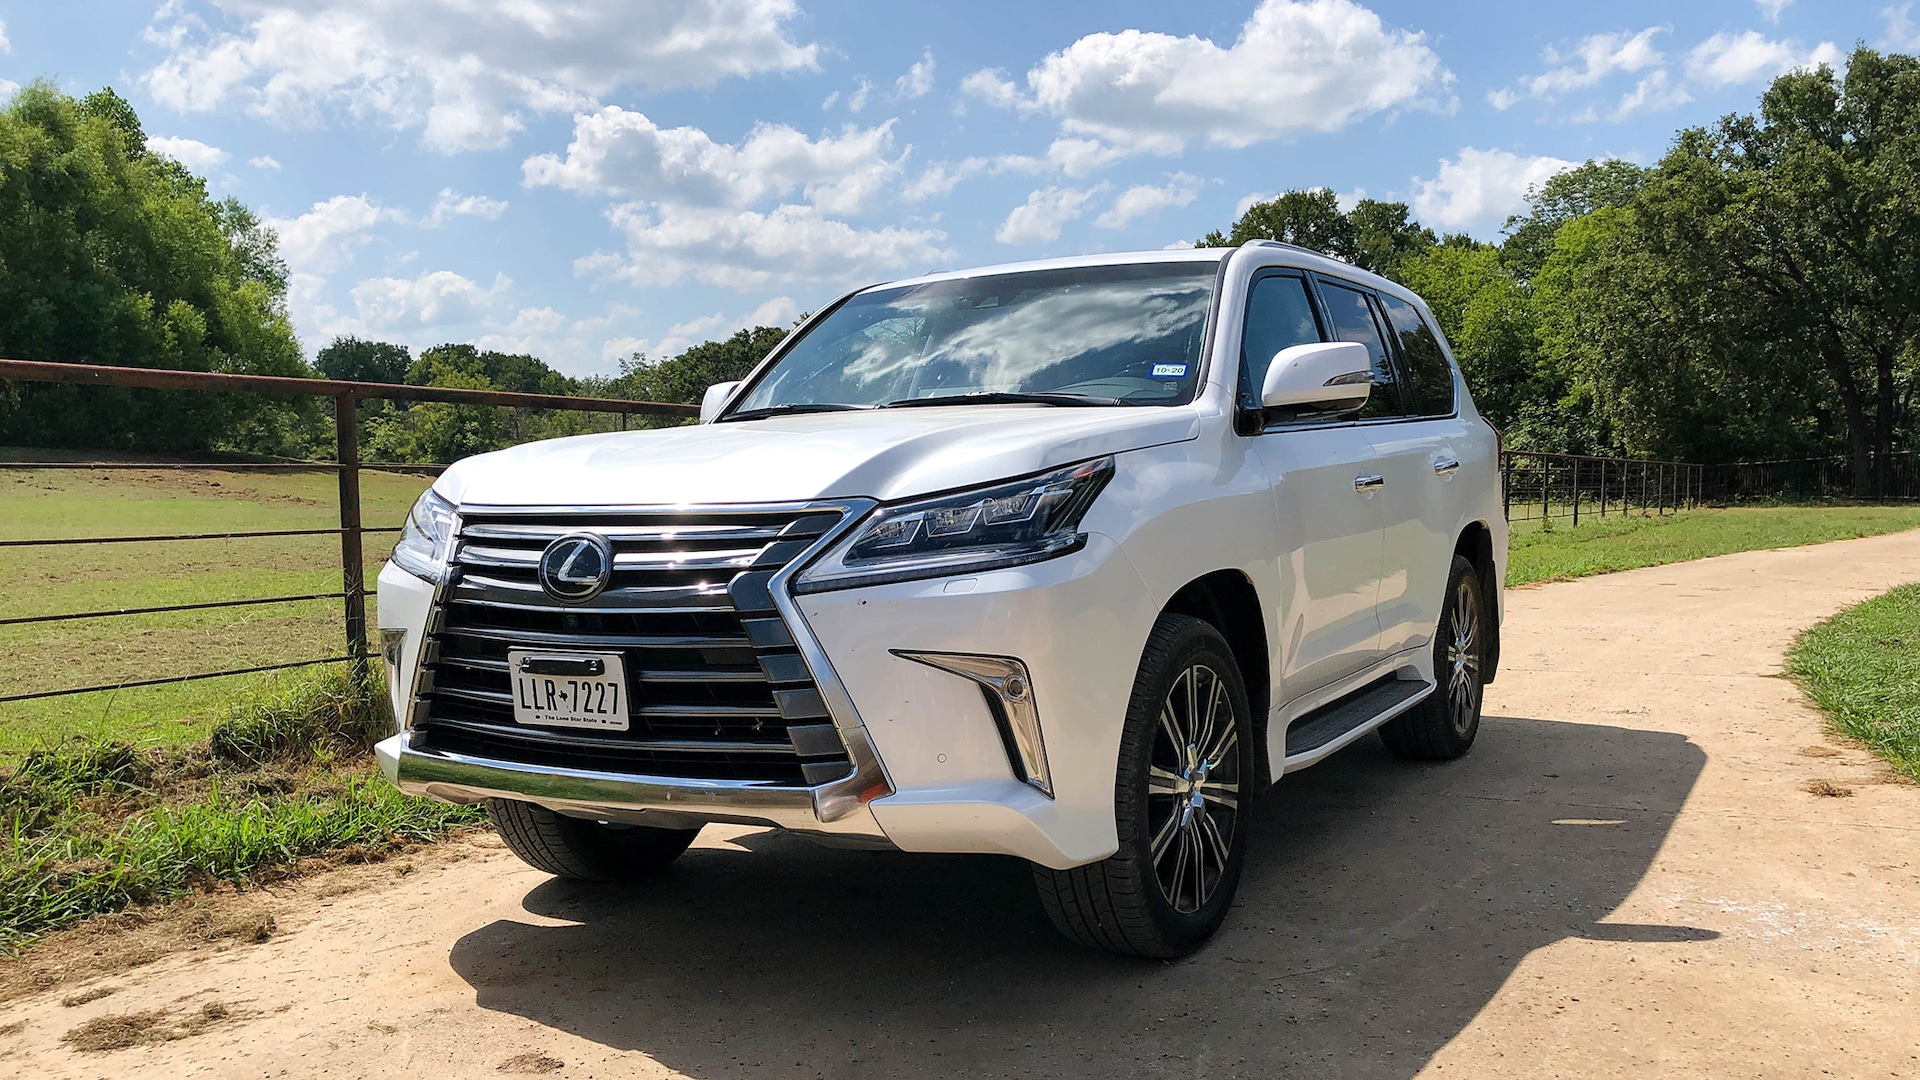 Lexus LX570 Review: Texas-Sized Size, Capability, and Luxury